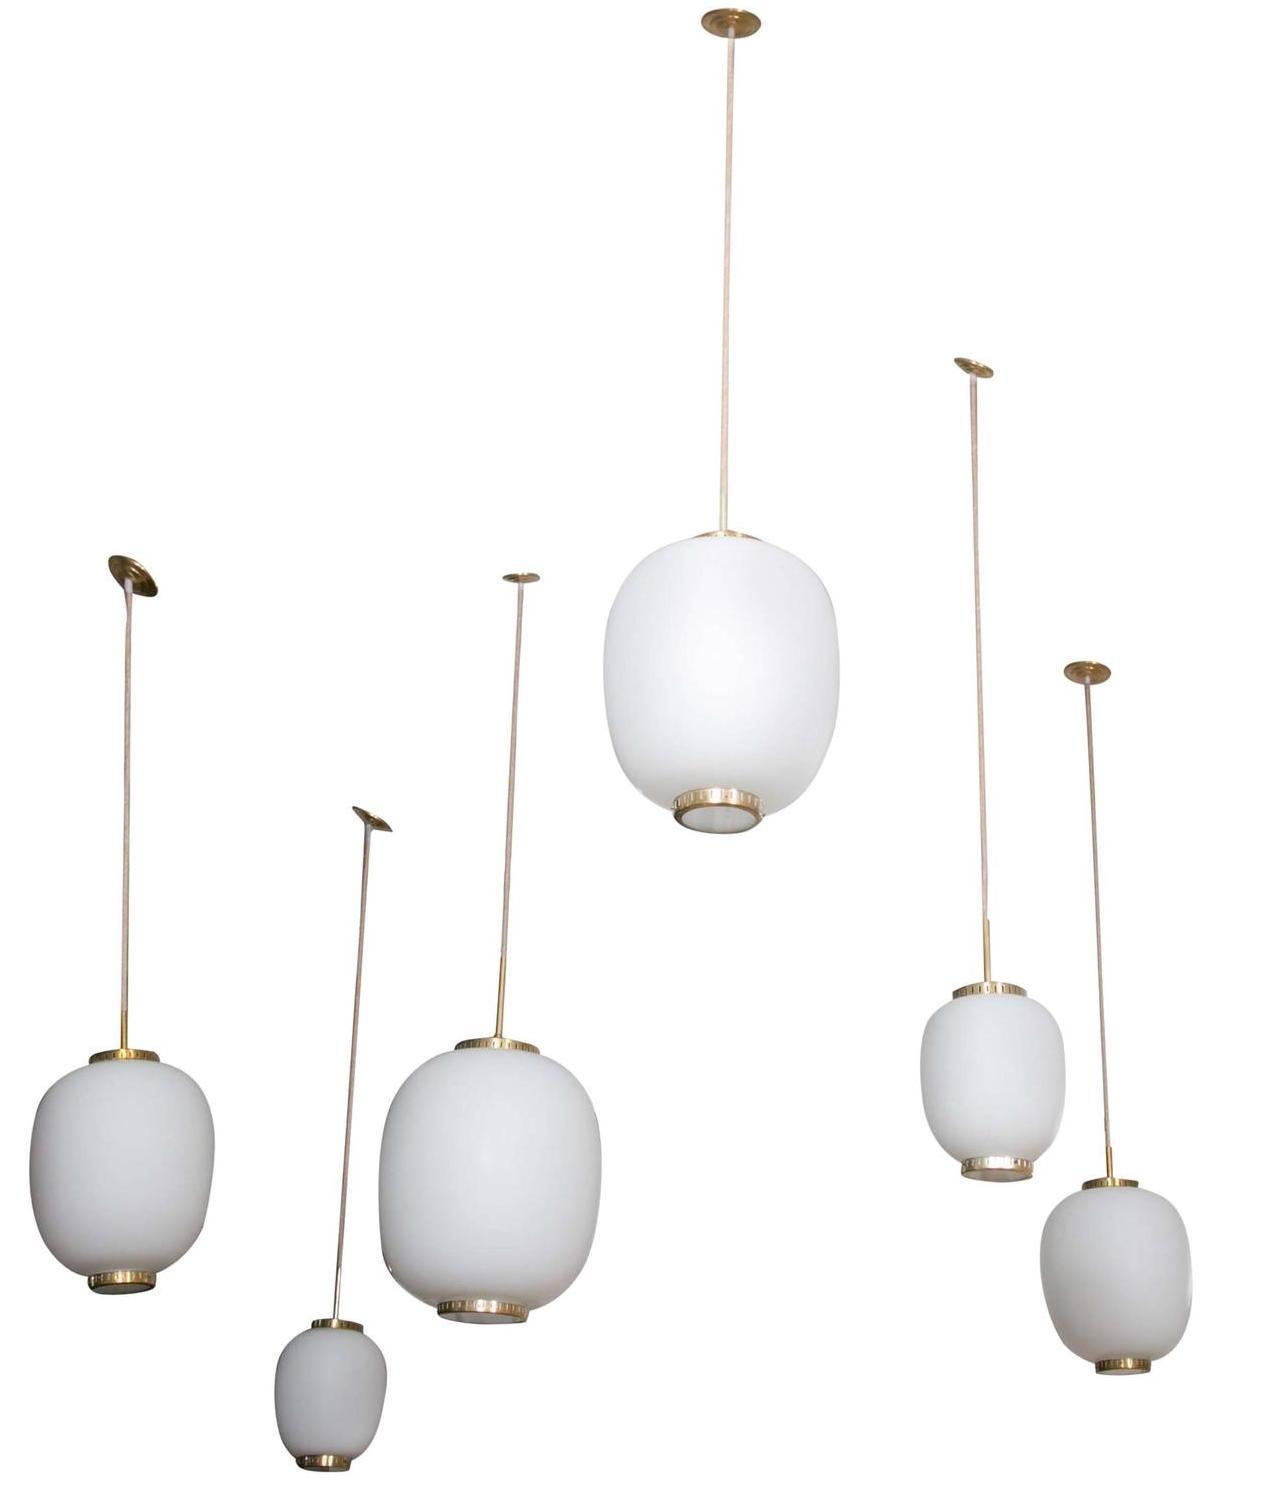 Mid-20th Century Collection of 9 Opaline Glass and Brass Ceiling Fixtures, Bent Karlby for Lyfa